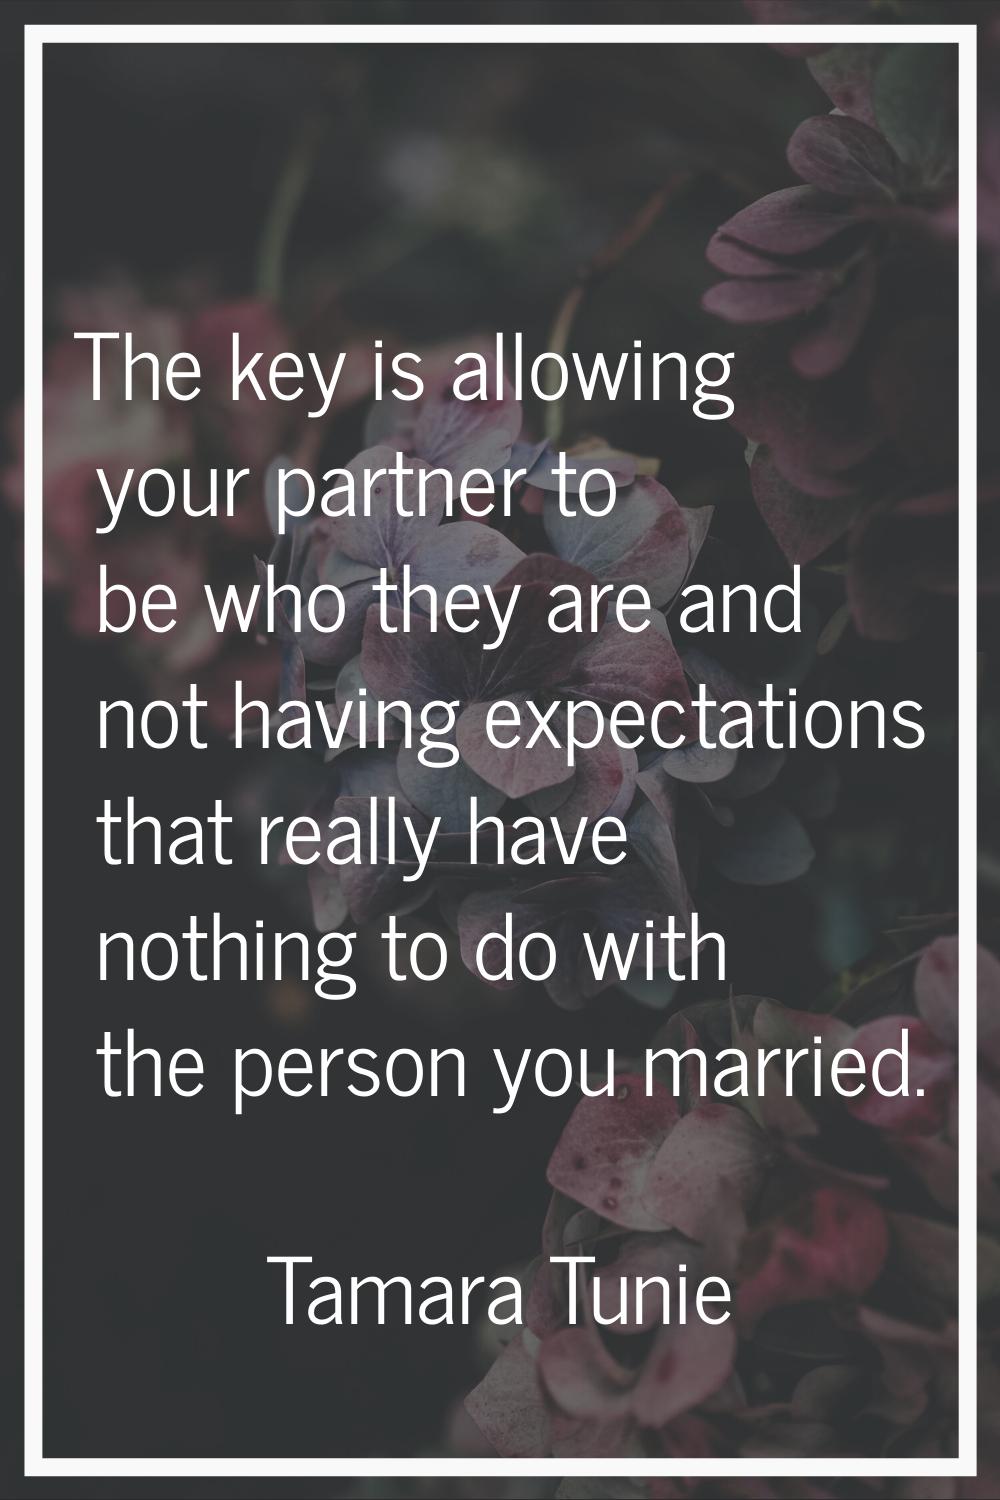 The key is allowing your partner to be who they are and not having expectations that really have no